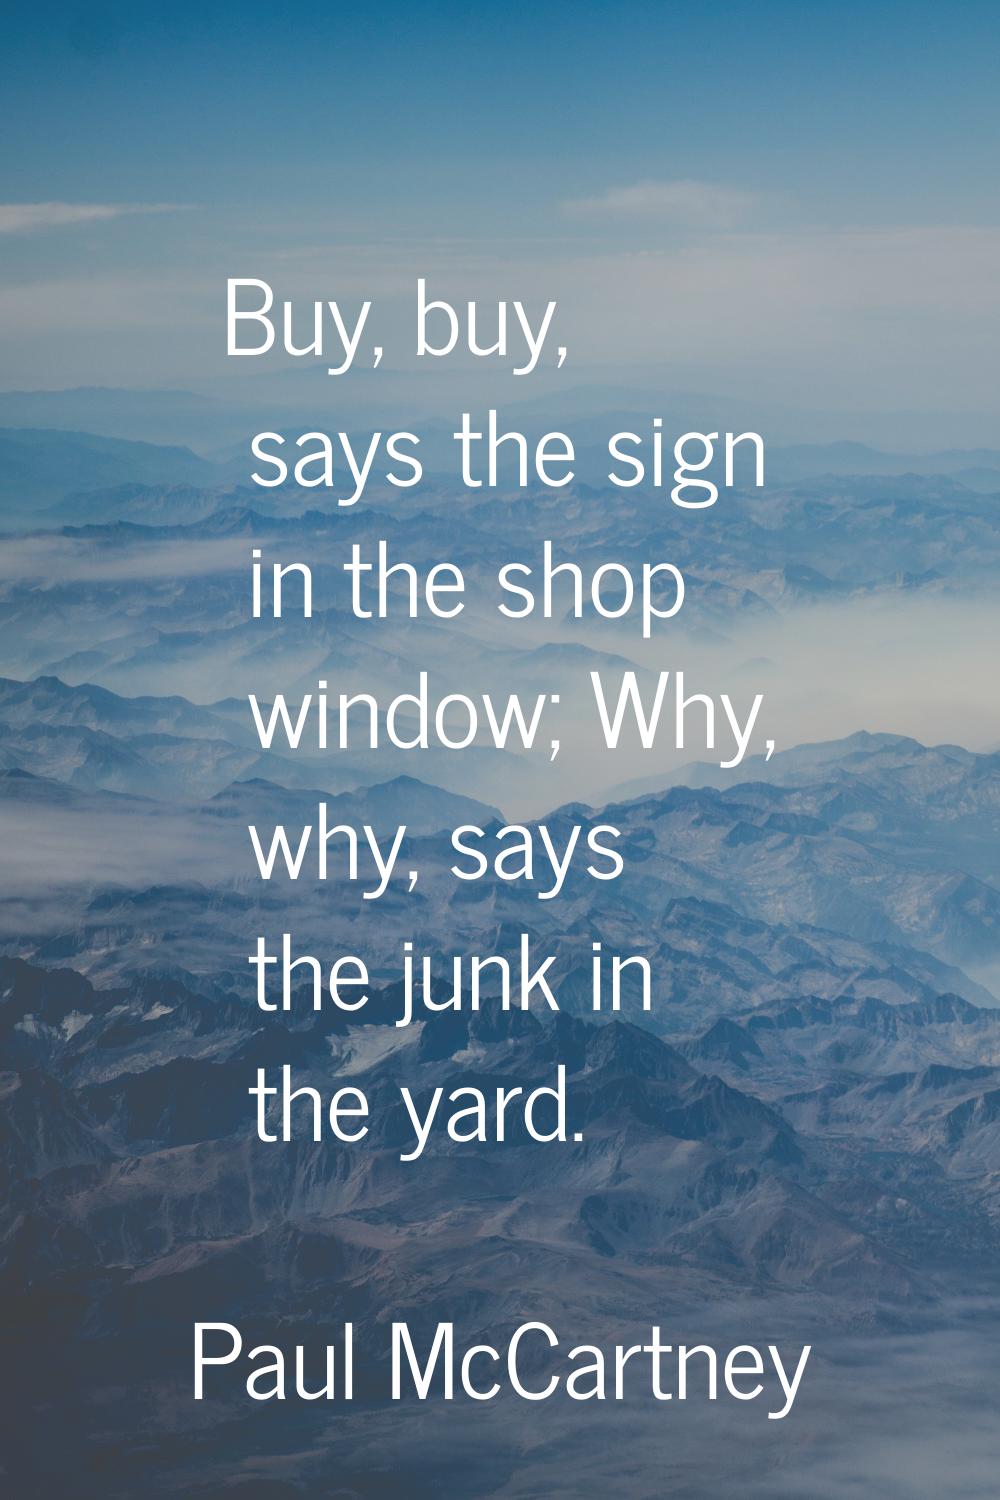 Buy, buy, says the sign in the shop window; Why, why, says the junk in the yard.